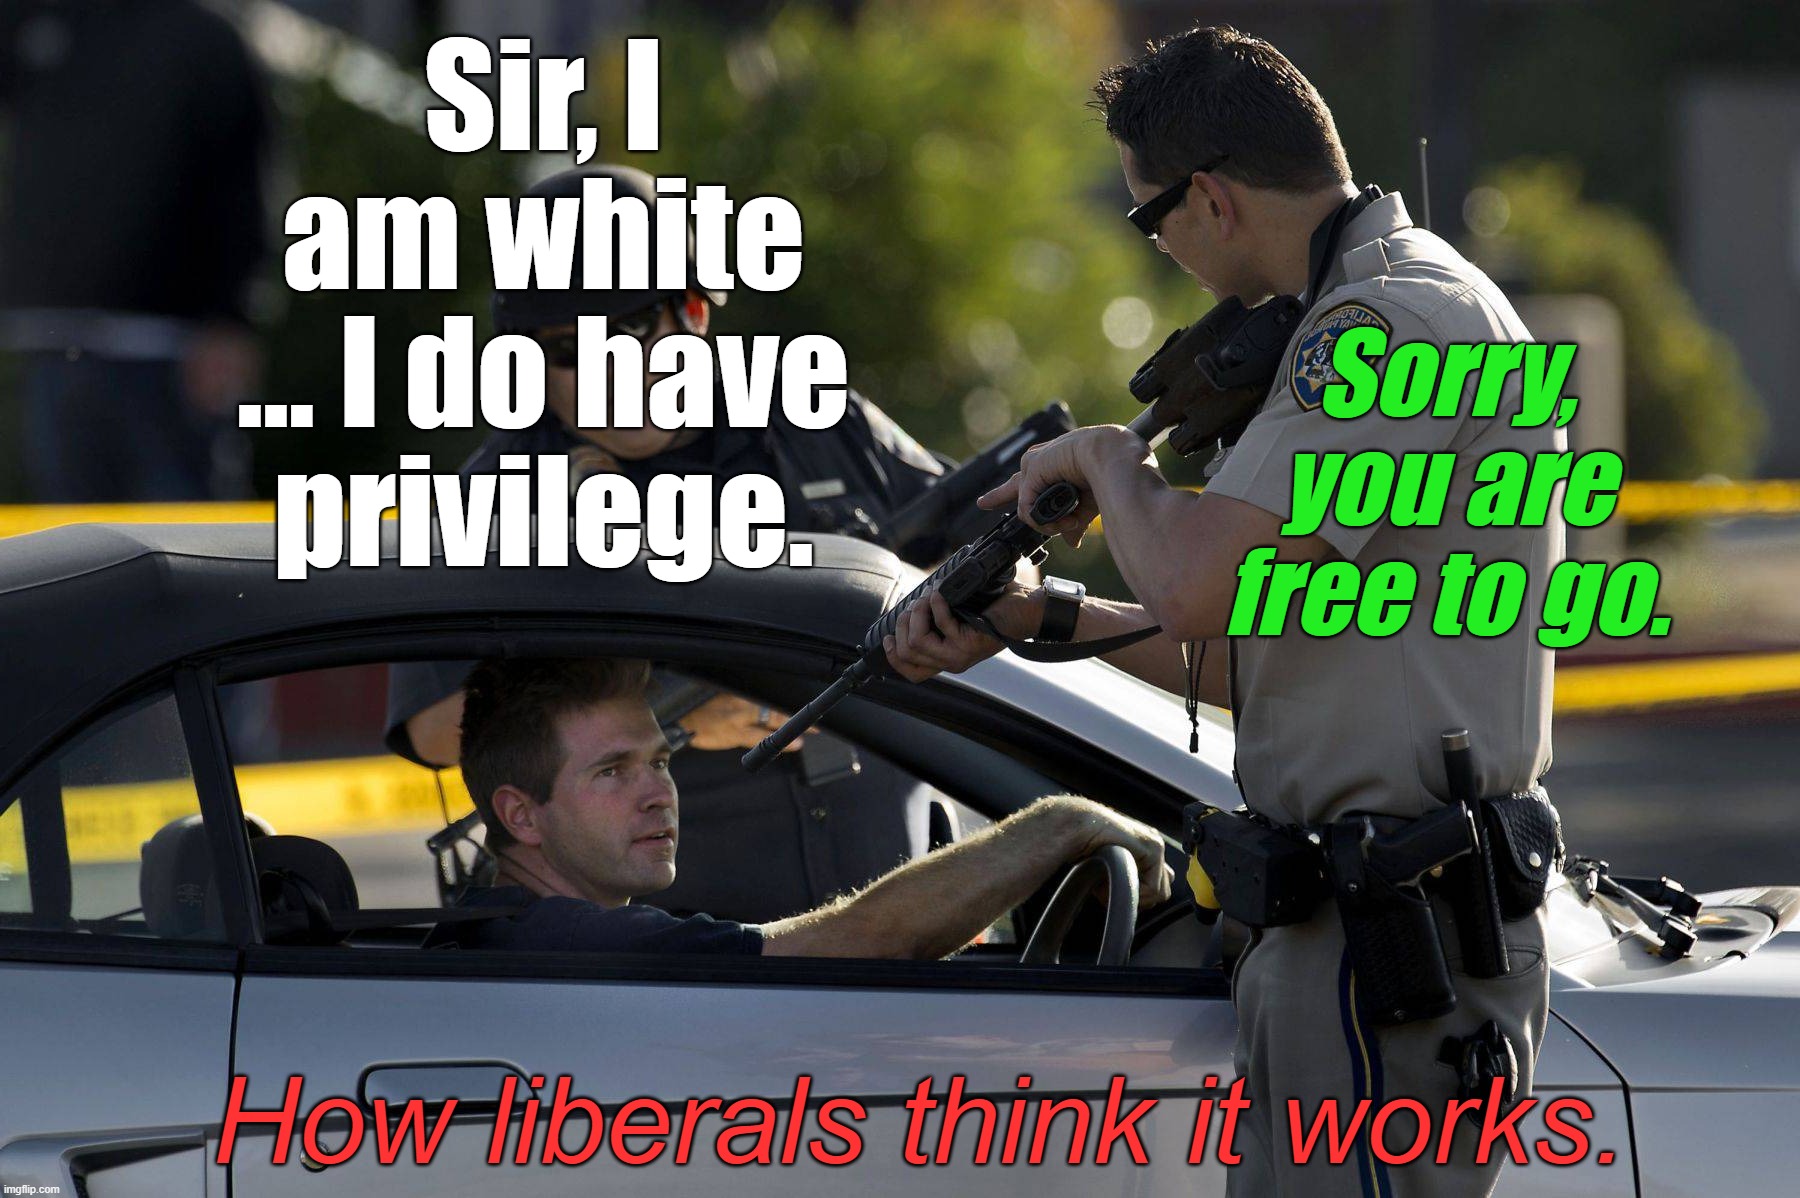 Sir, I am white ... I do have privilege. Sorry, you are free to go. How liberals think it works. | image tagged in political meme,white privilege | made w/ Imgflip meme maker